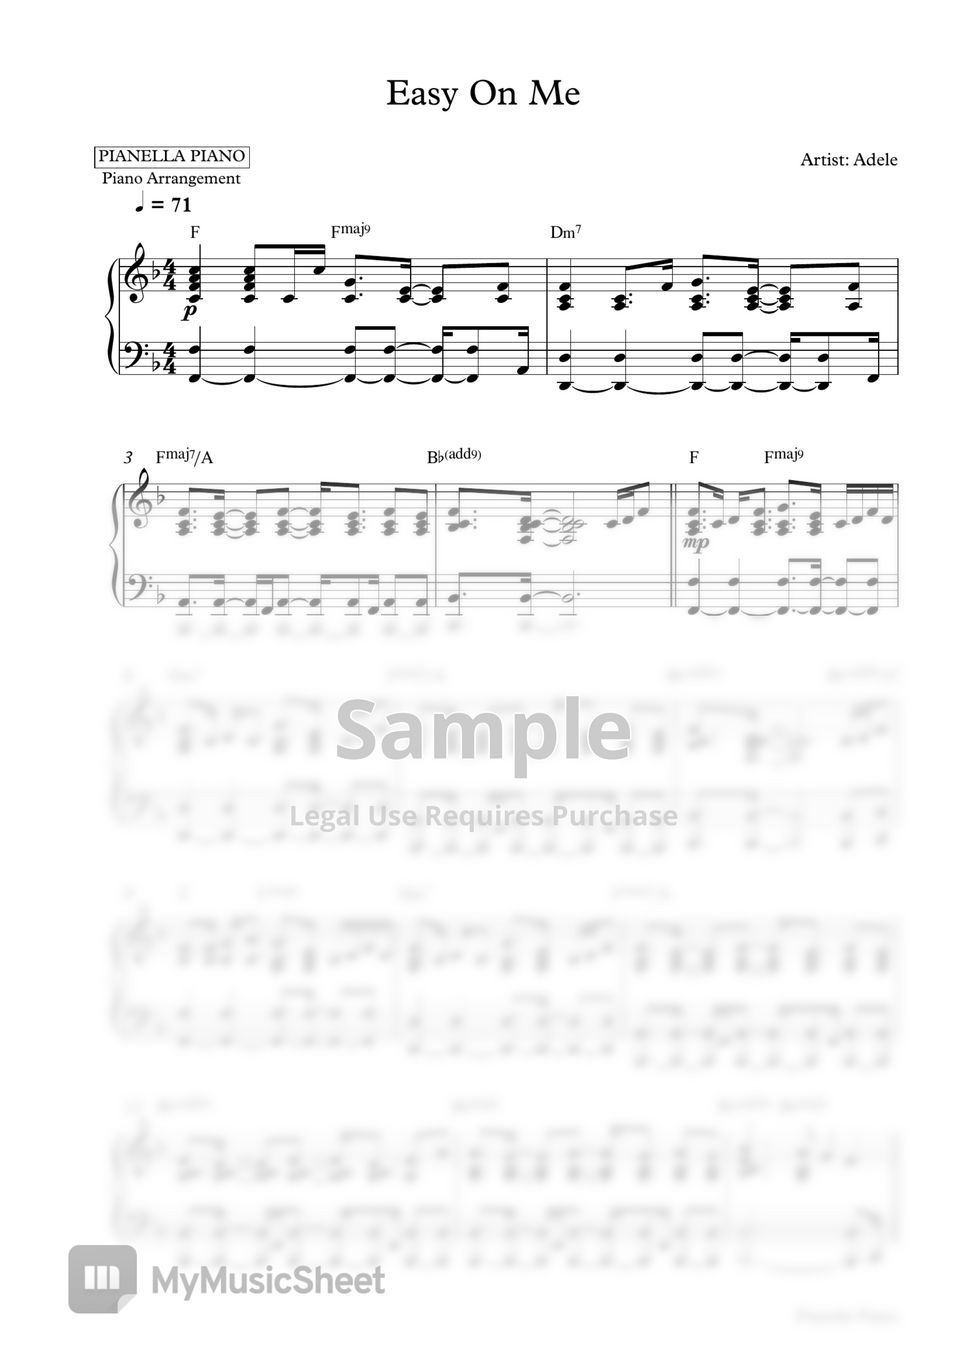 Adele - Easy On Me (Piano Sheet) by Pianella Piano